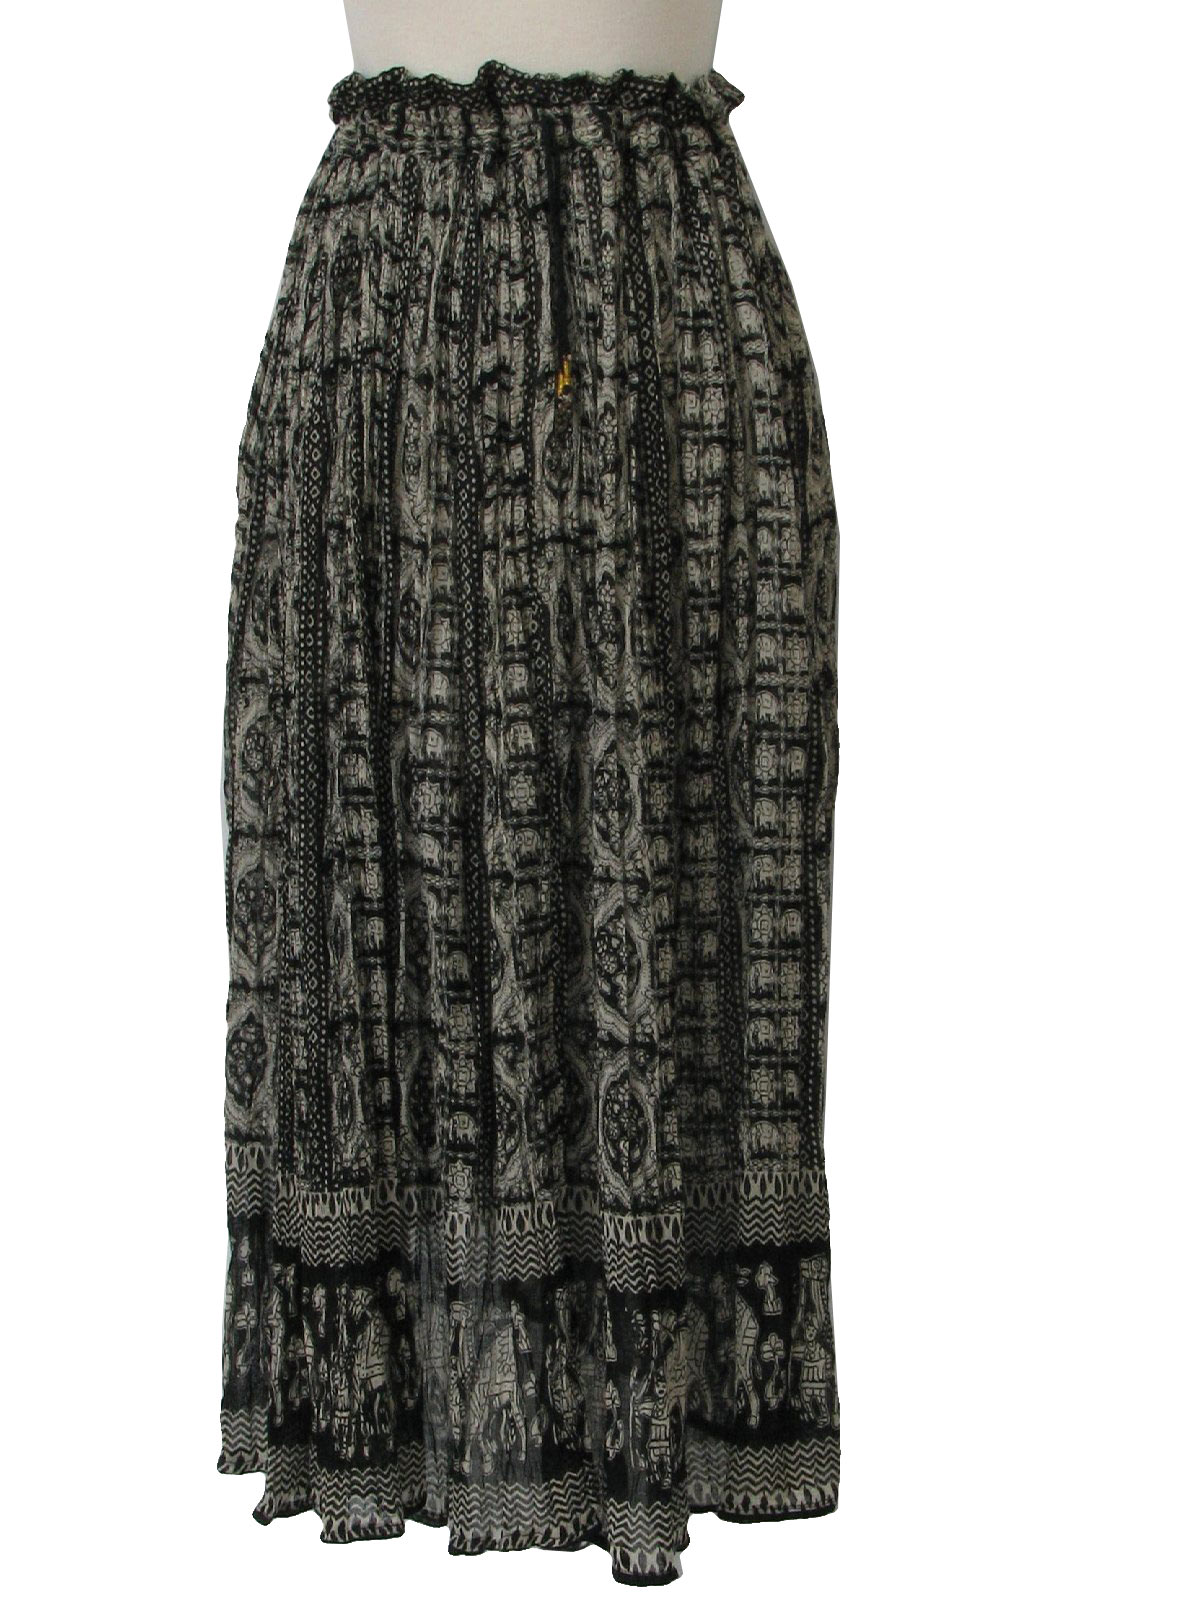 Retro 80's Hippie Skirt: 80s -Patchouli- Womens black and ivory, camels ...